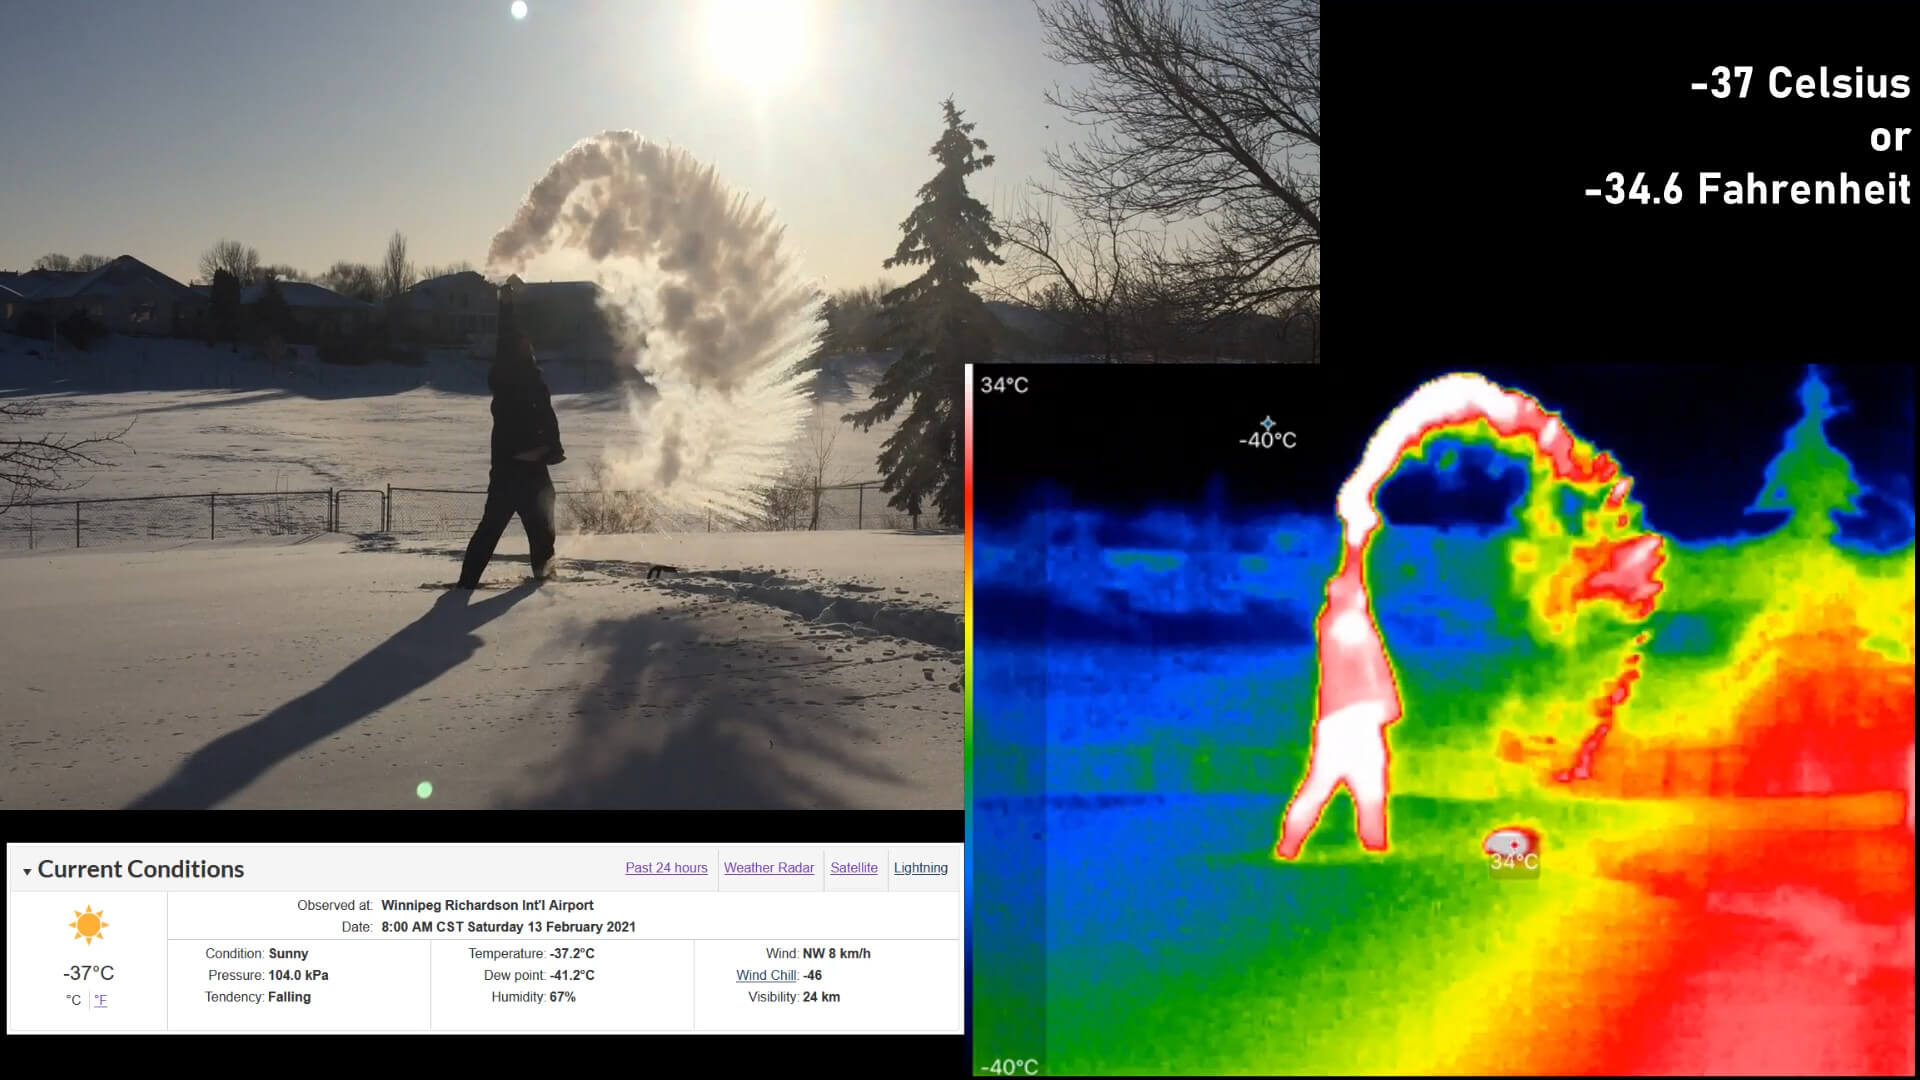 Thermal View of Hot Water Thrown into the Air in Winter - Part II